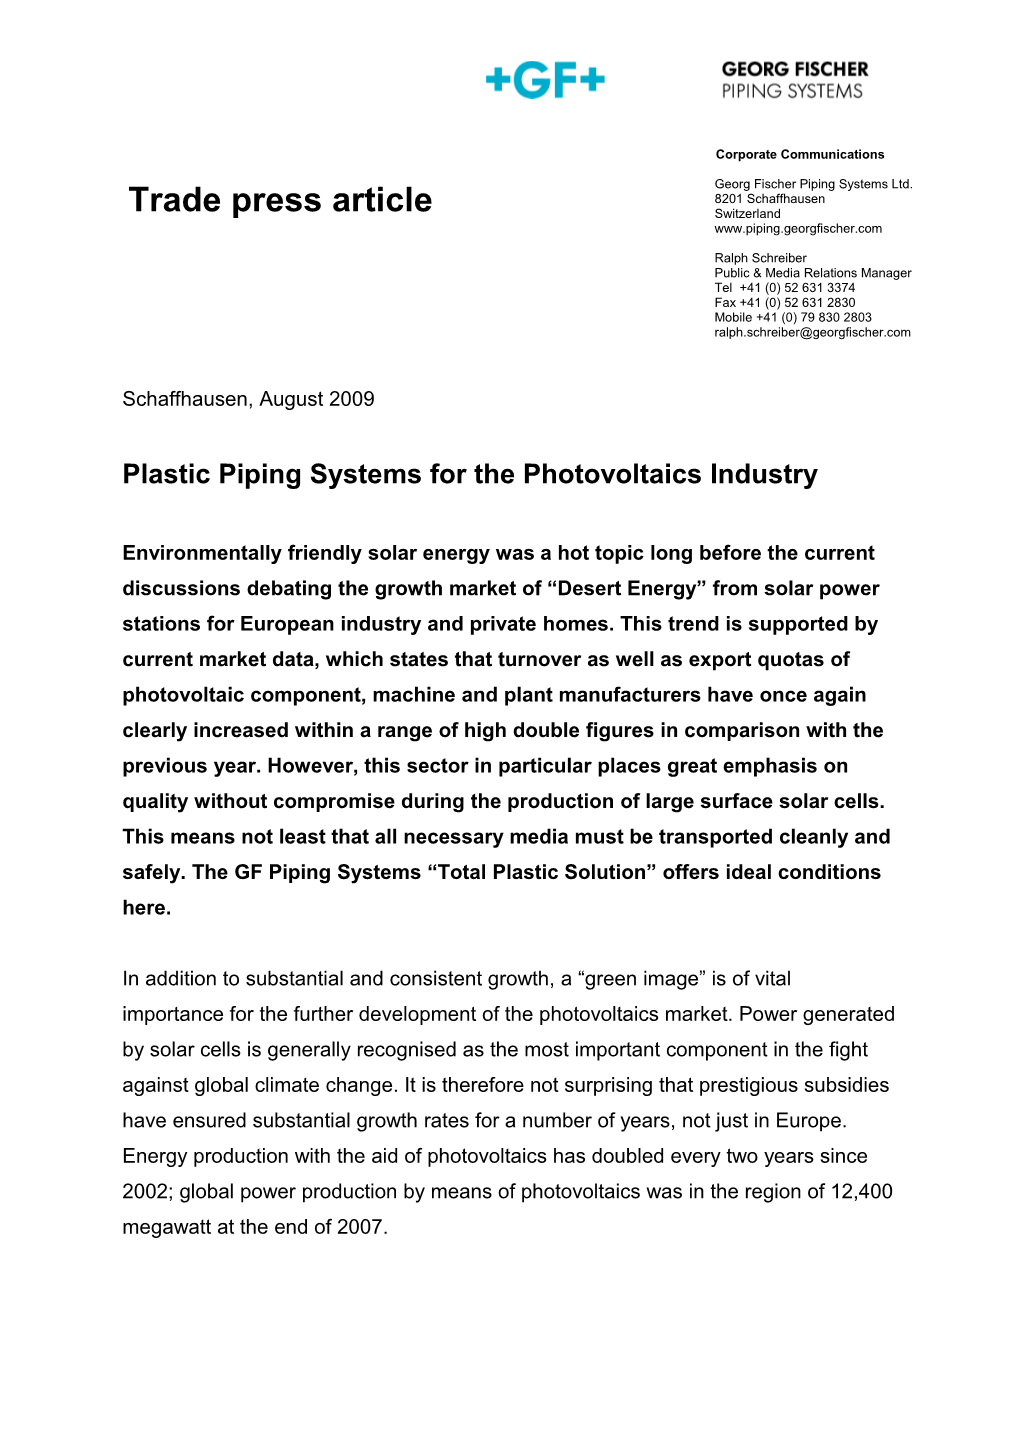 Plastic Piping Systems for the Photovoltaics Industry